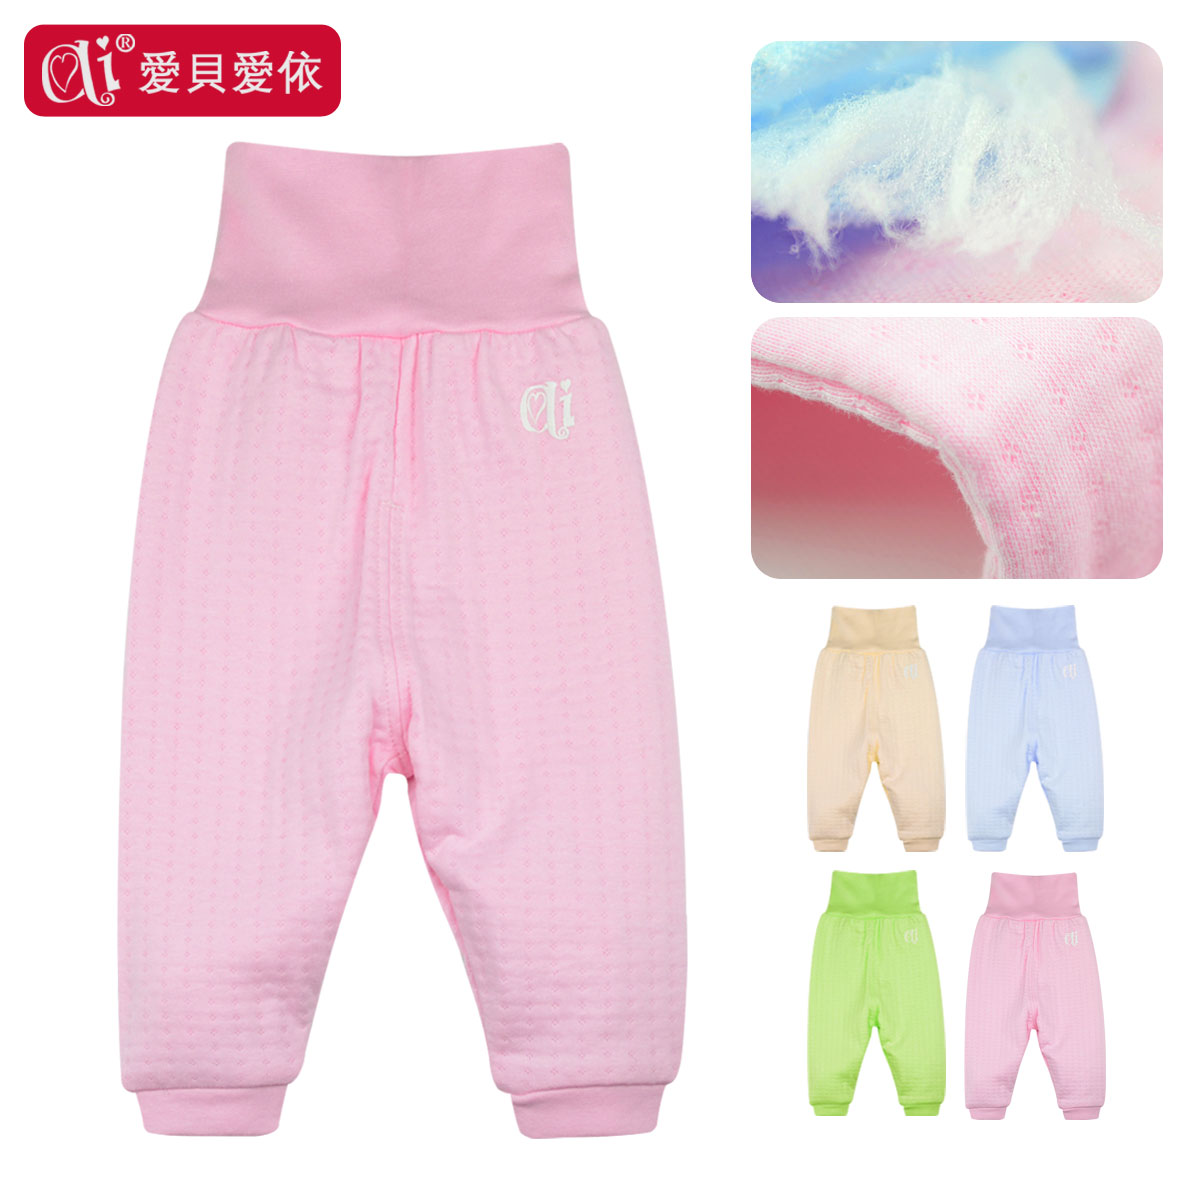 Infant clothes autumn and winter newborn clothes supplies cotton-padded thermal high waist pants panties 2012y